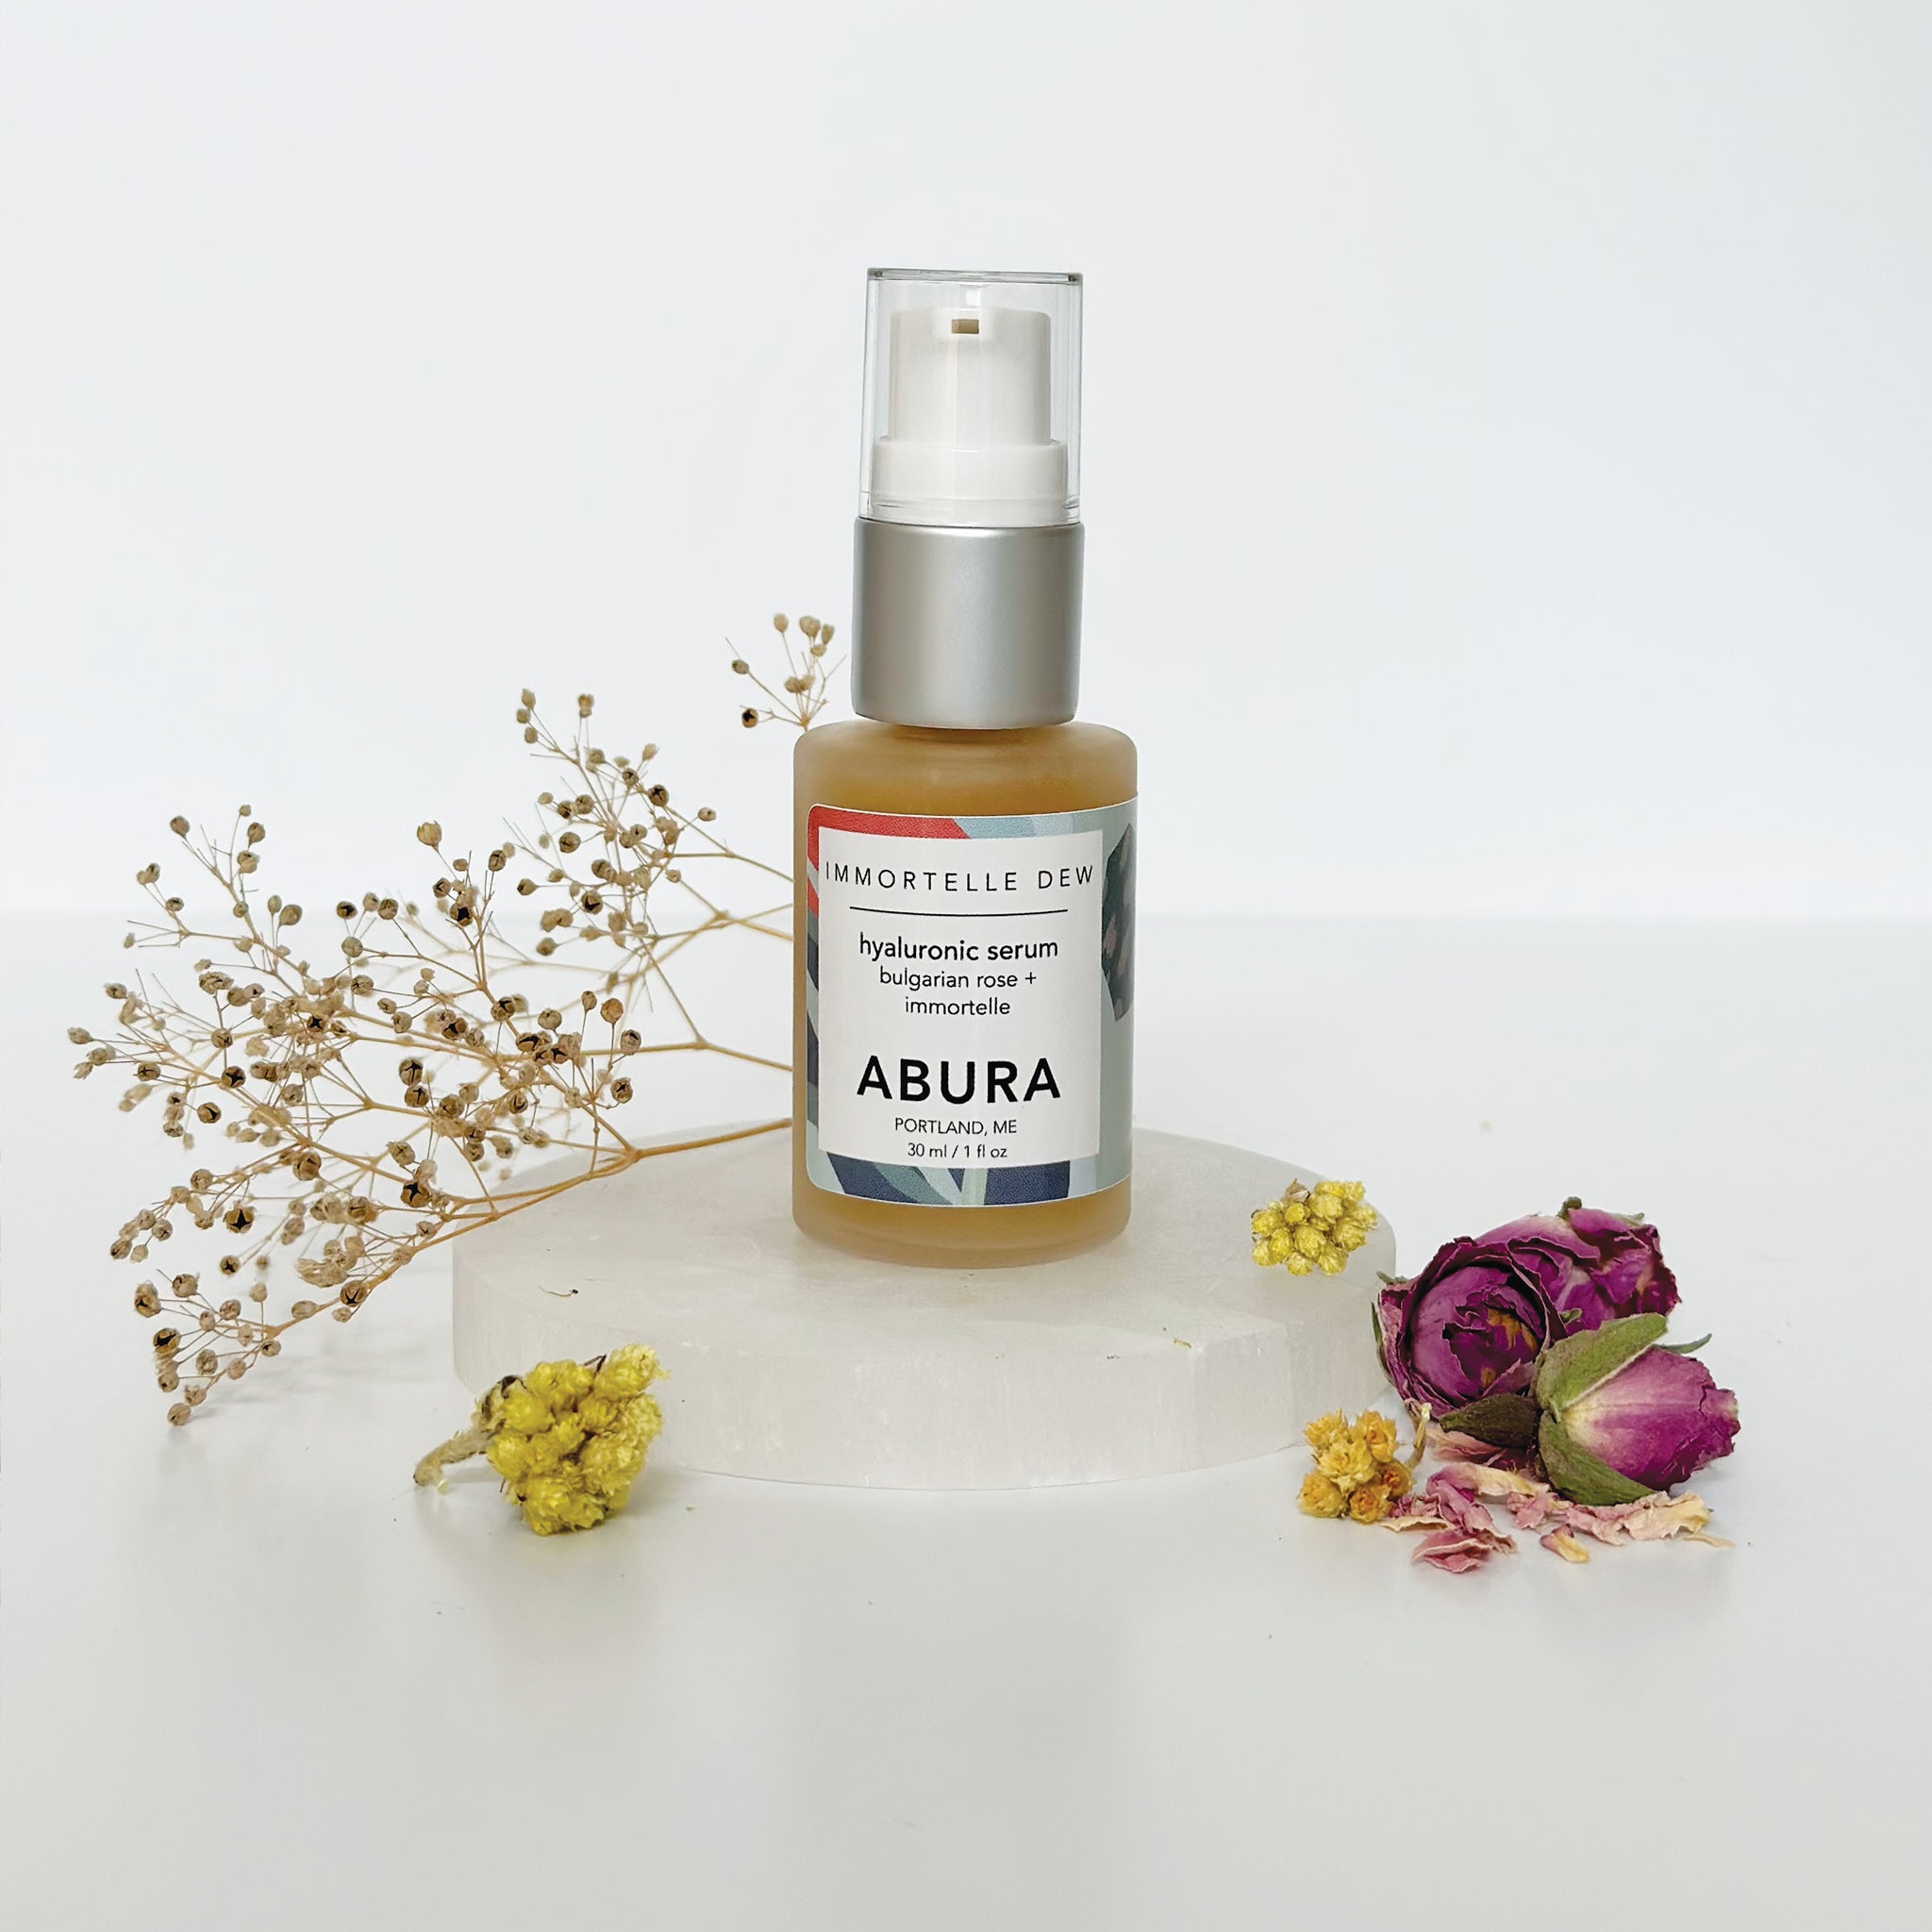 Immortelle Dew - Hyaluronic Serum -  - Portland Maine - Natural Skincare Products